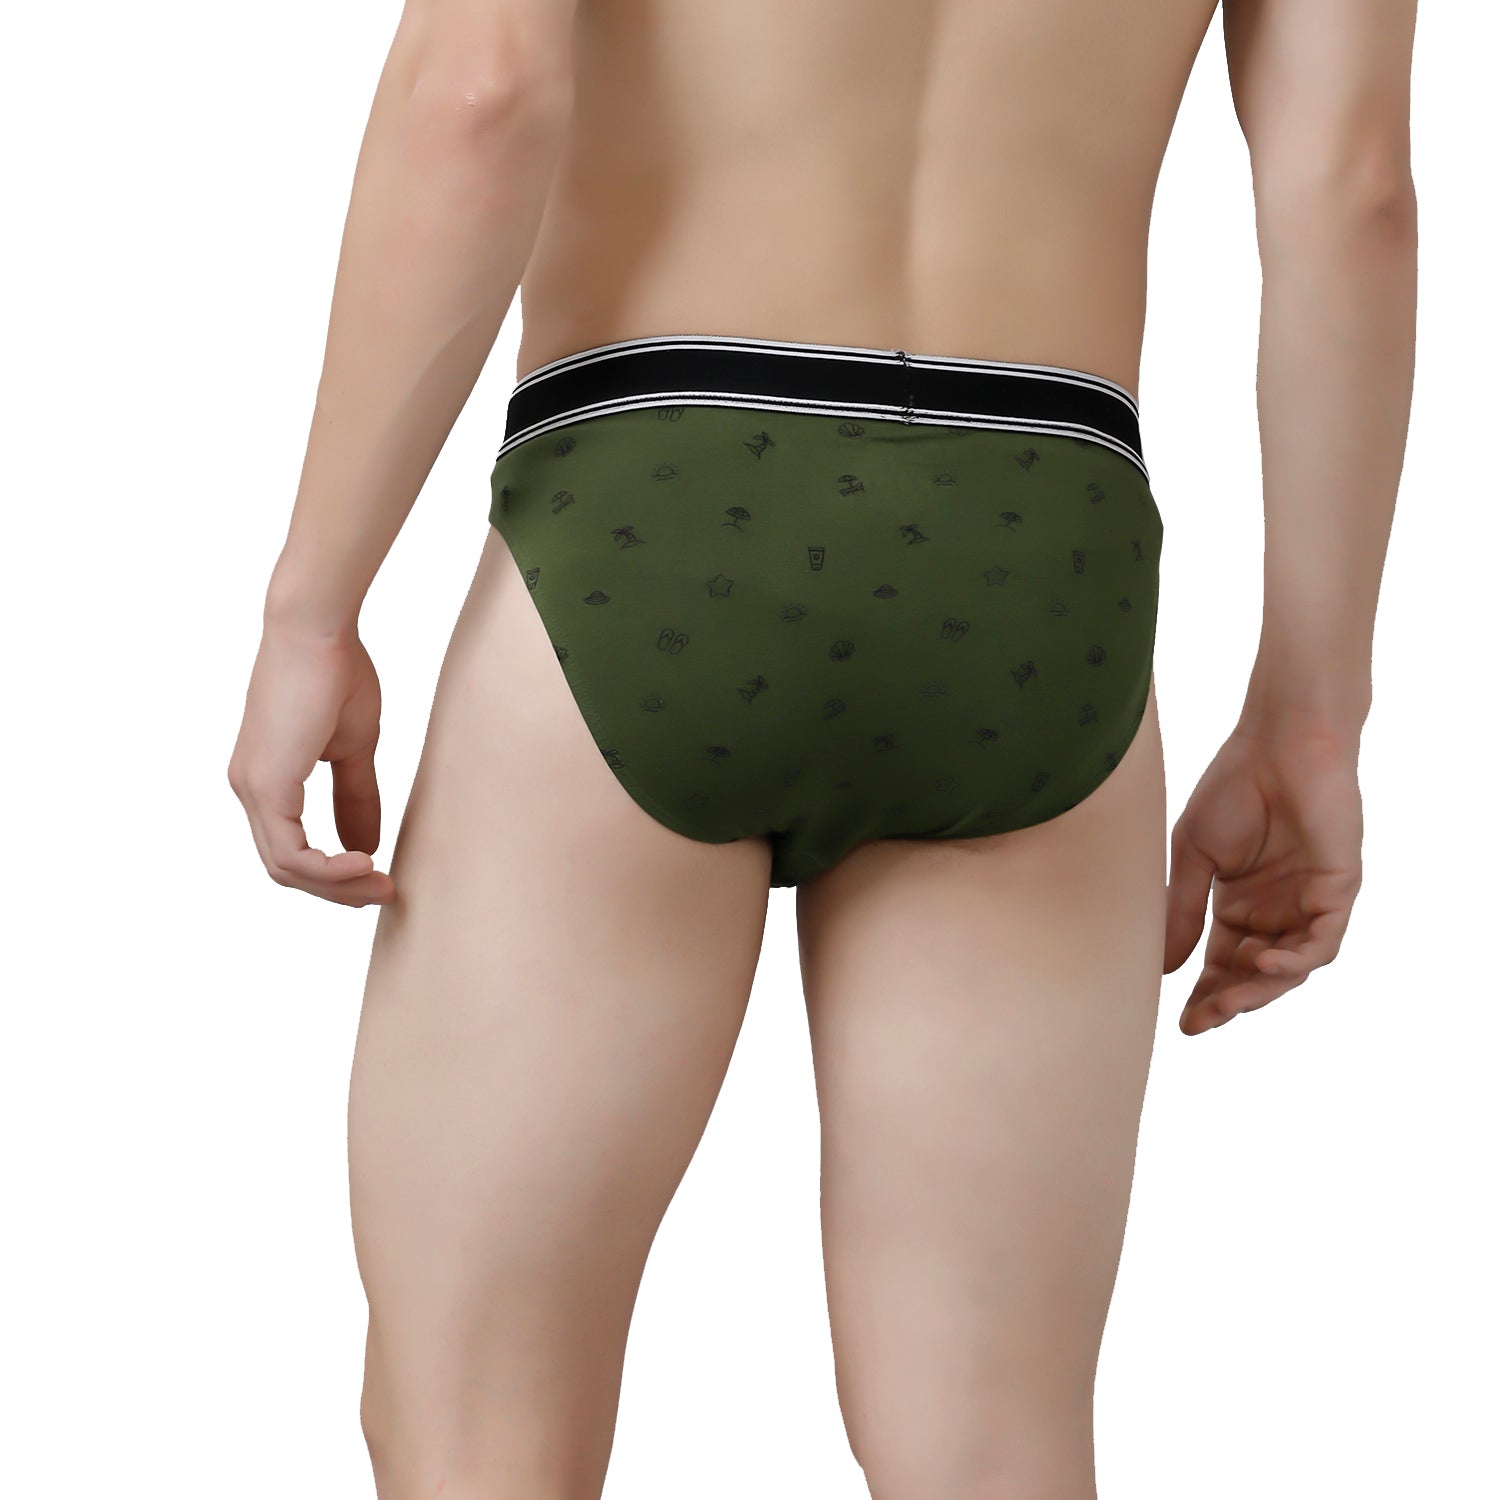 CP BRO Men's Printed Briefs with Exposed Waistband Value Pack - Orange & Olive Green (Pack of 2)